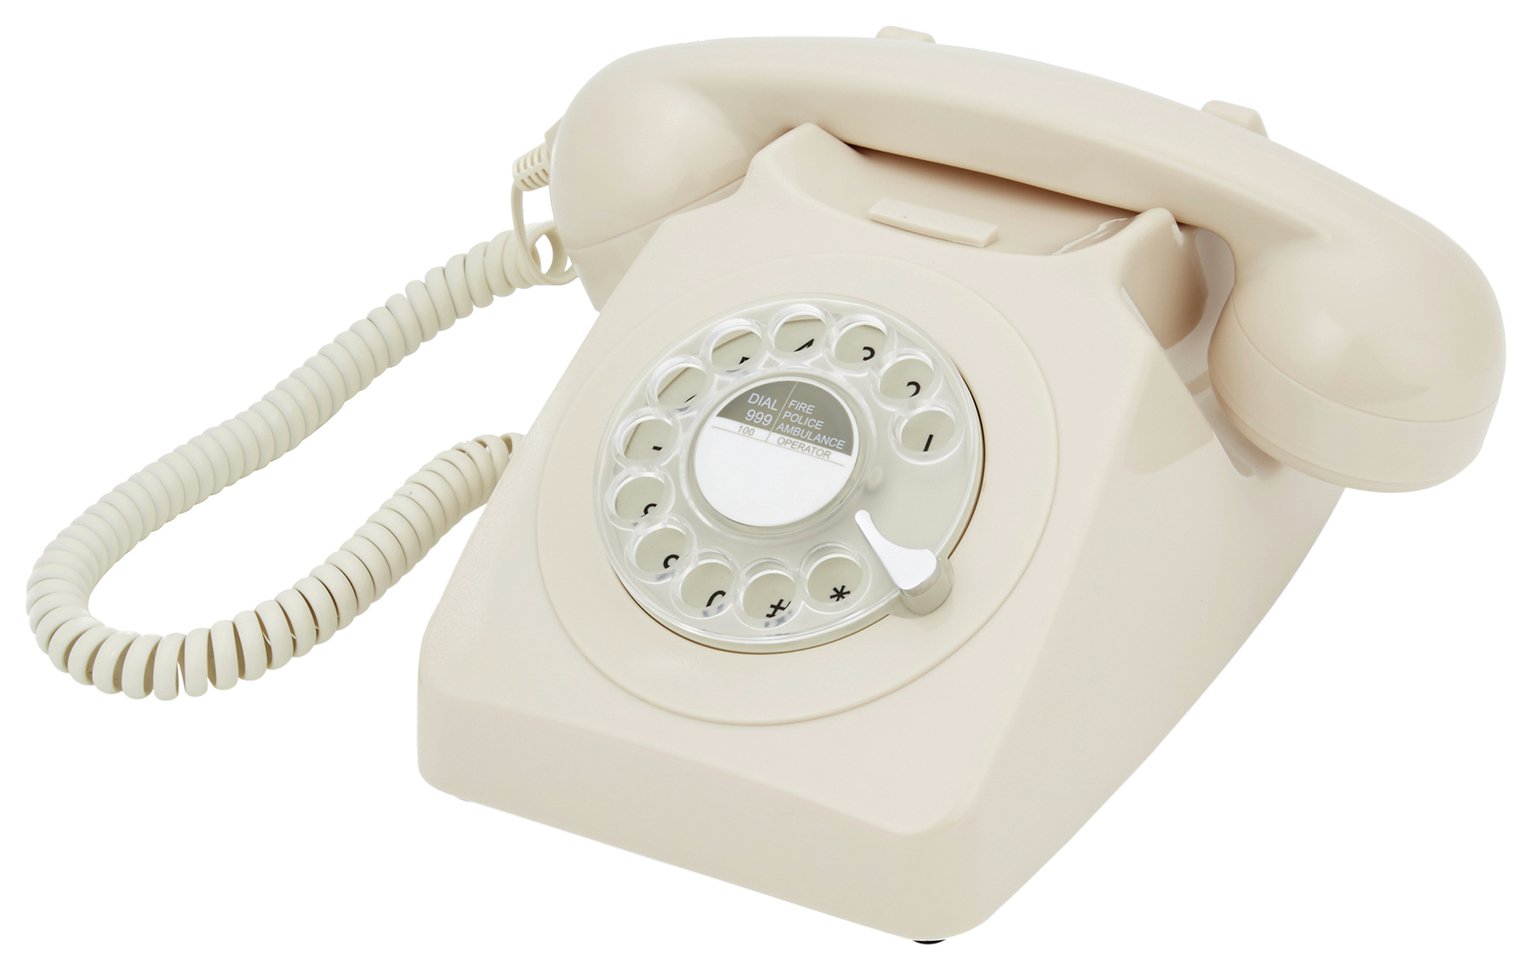 GPO 746 Rotary Dial Phone Review